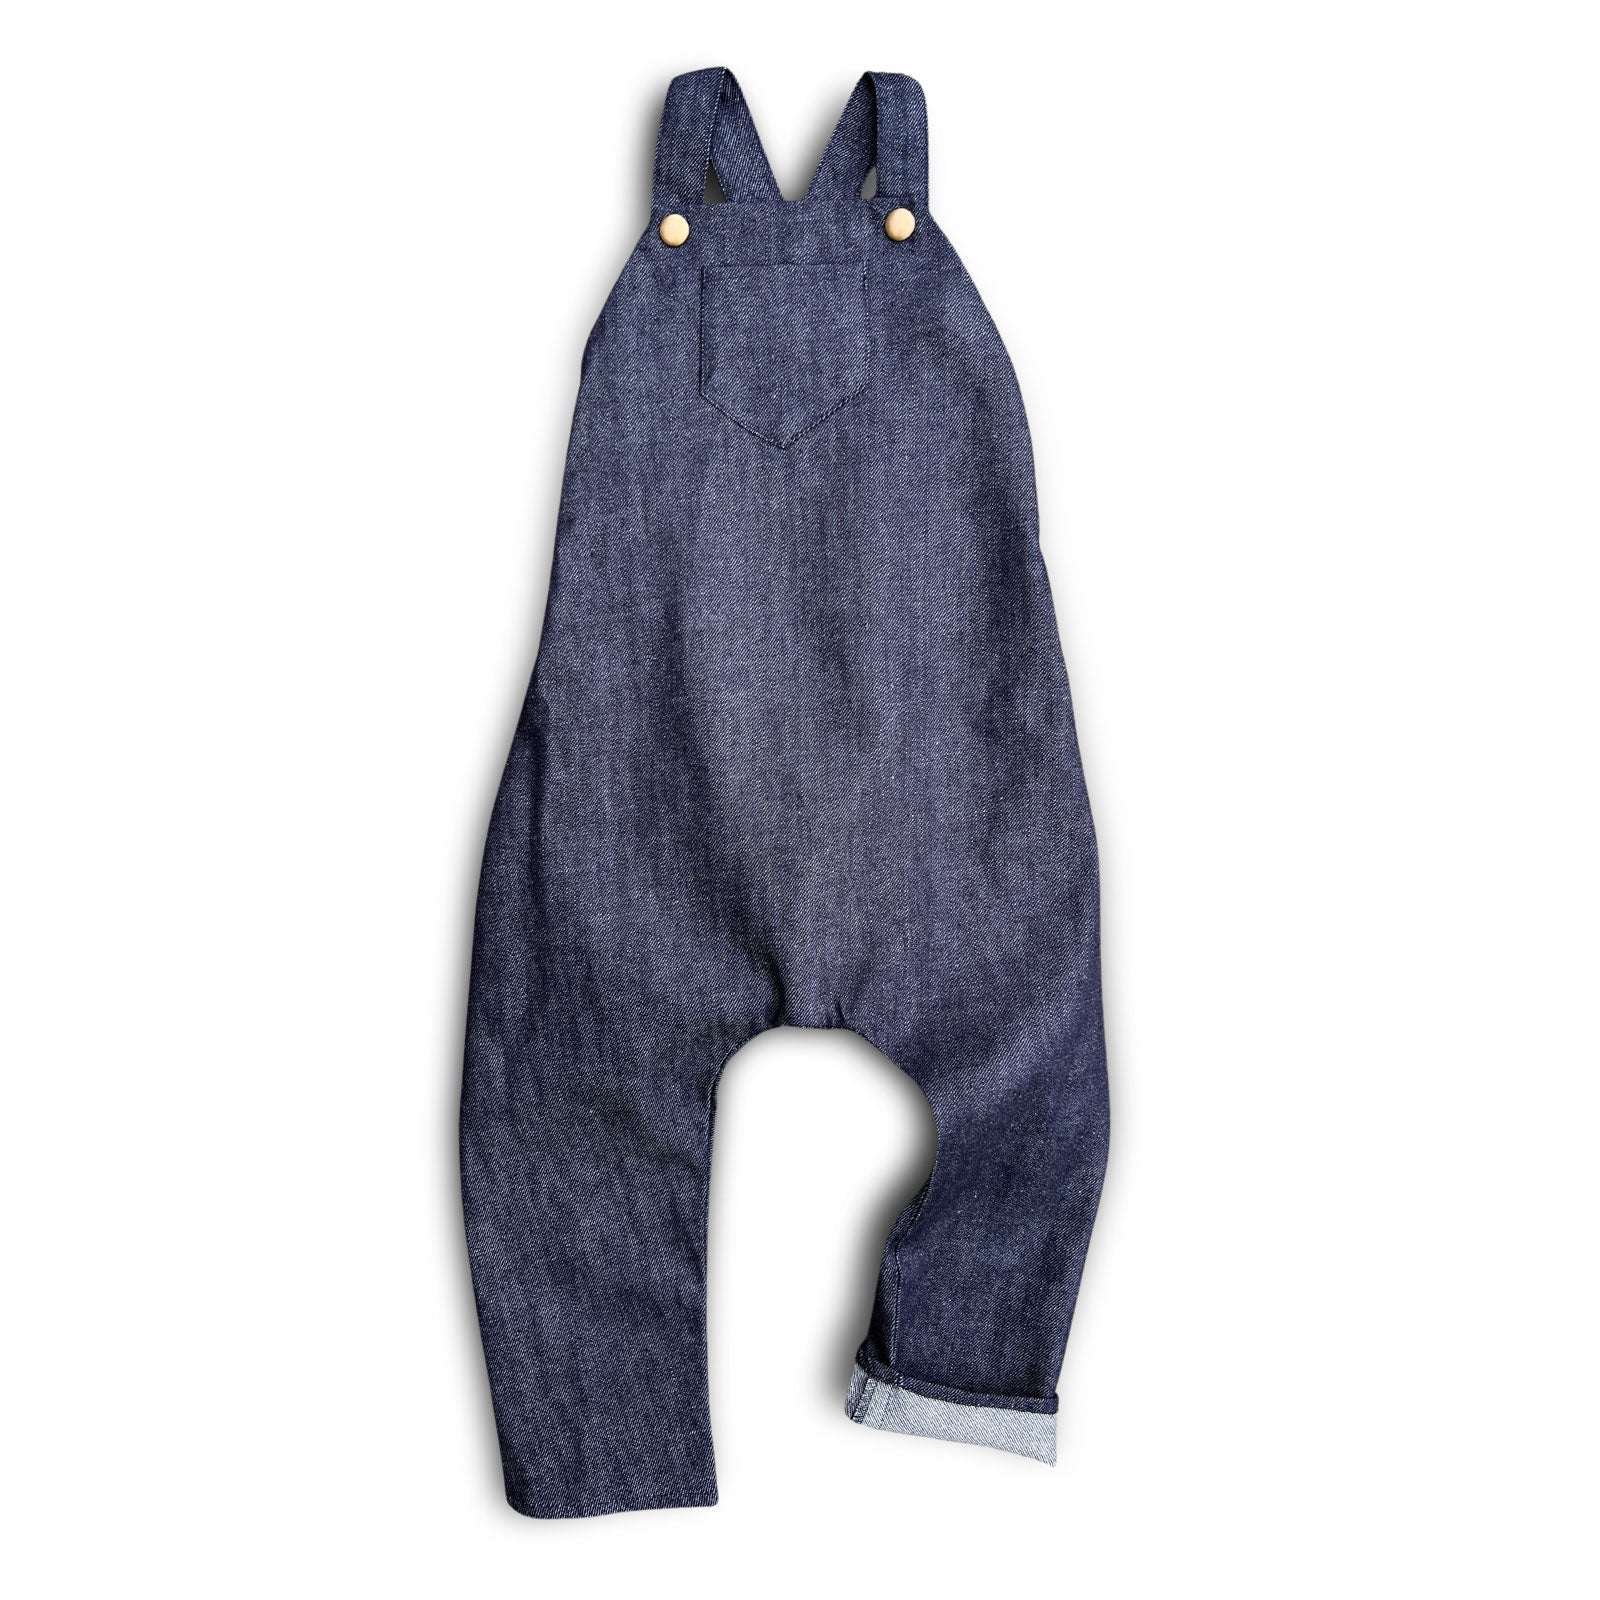 IV. Factors to Consider when Choosing Overalls for Babies